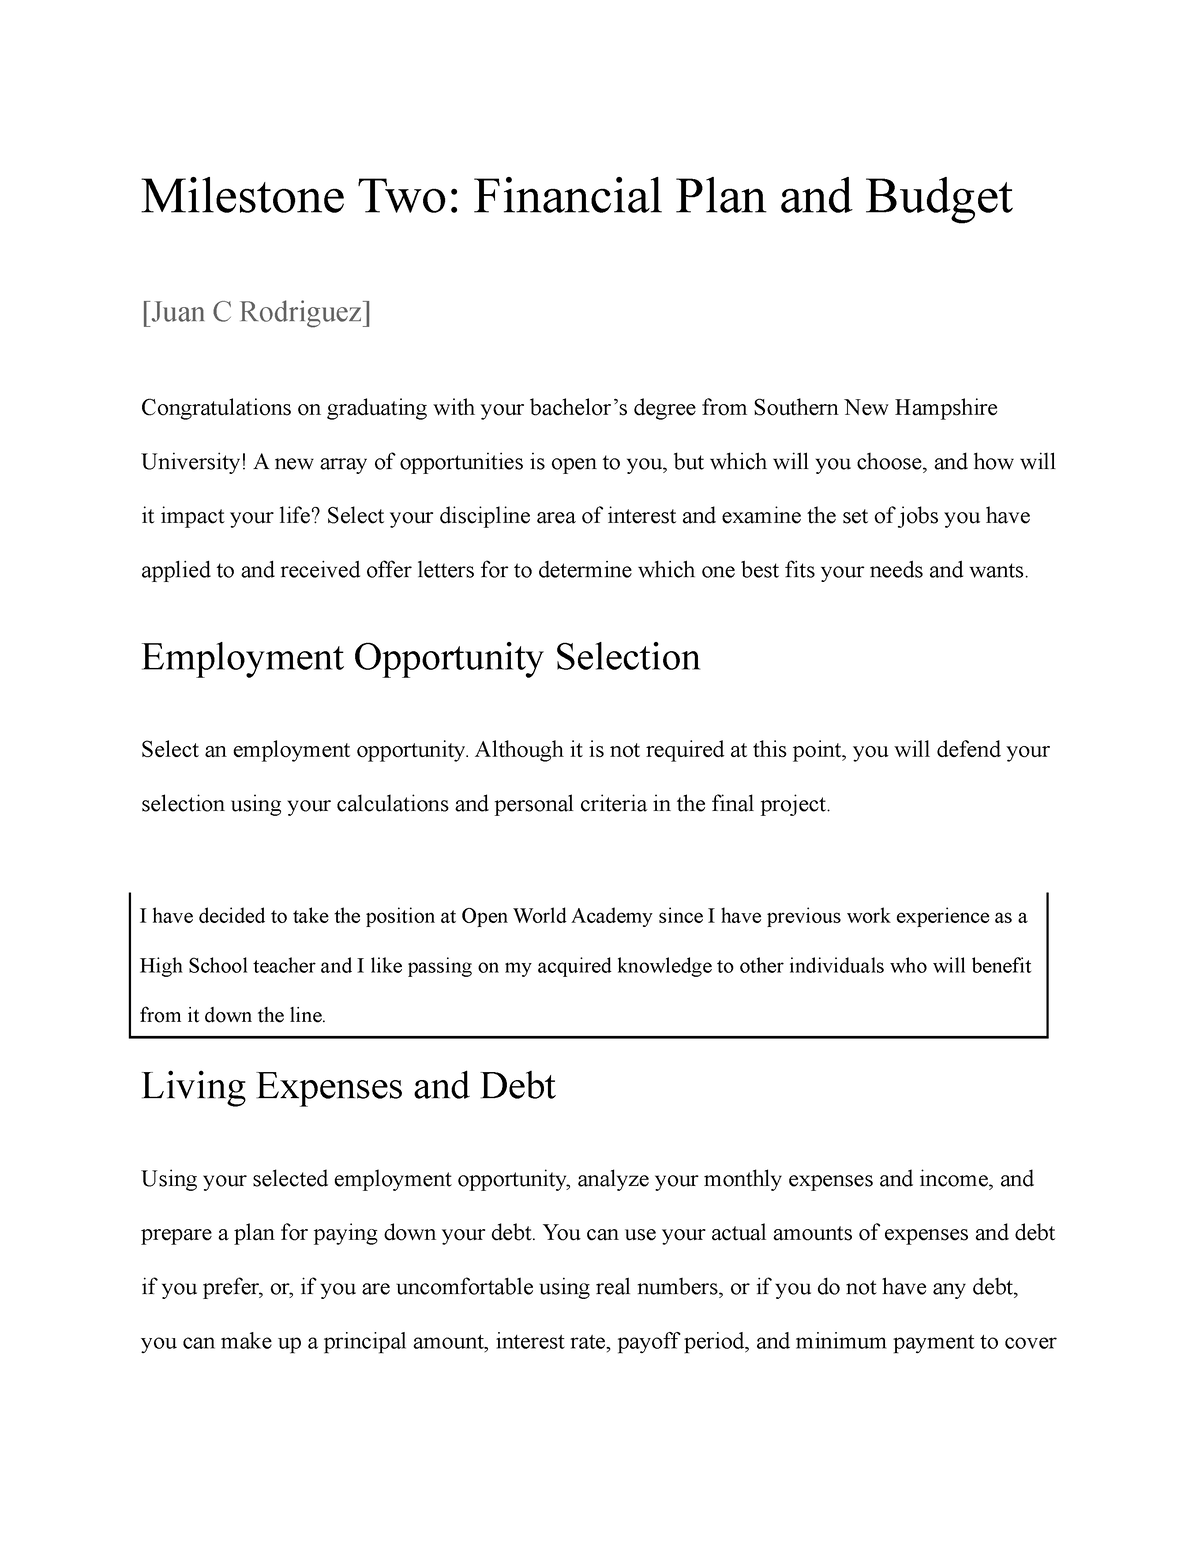 Financial Plan and Budget for Employment Opportunity at Open World ...